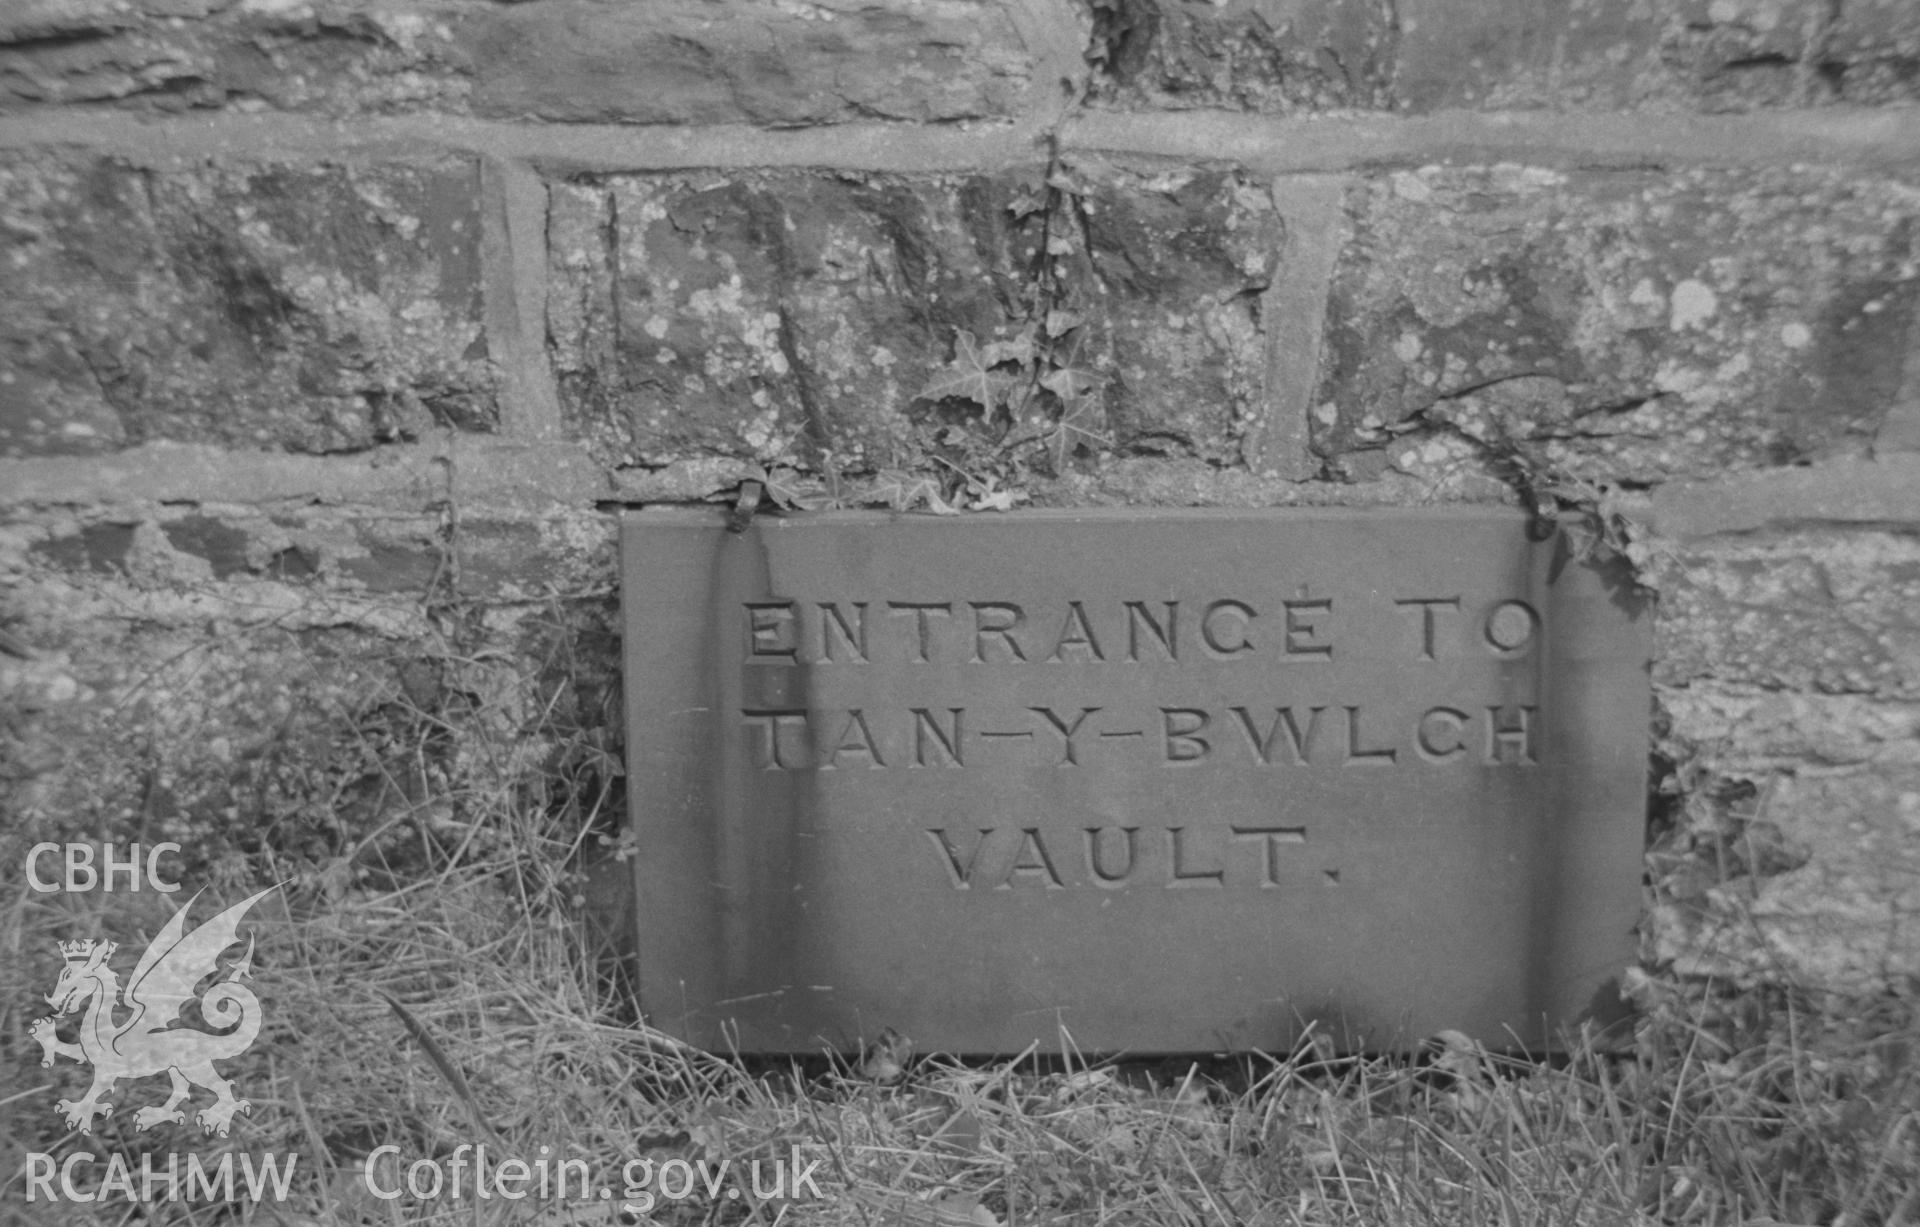 Digital copy of a black and white negative showing entrance stone to the Tan y Bwlch vault at St. Non's Church, Llanerchaeron. Photographed by Arthur O. Chater in September 1966.